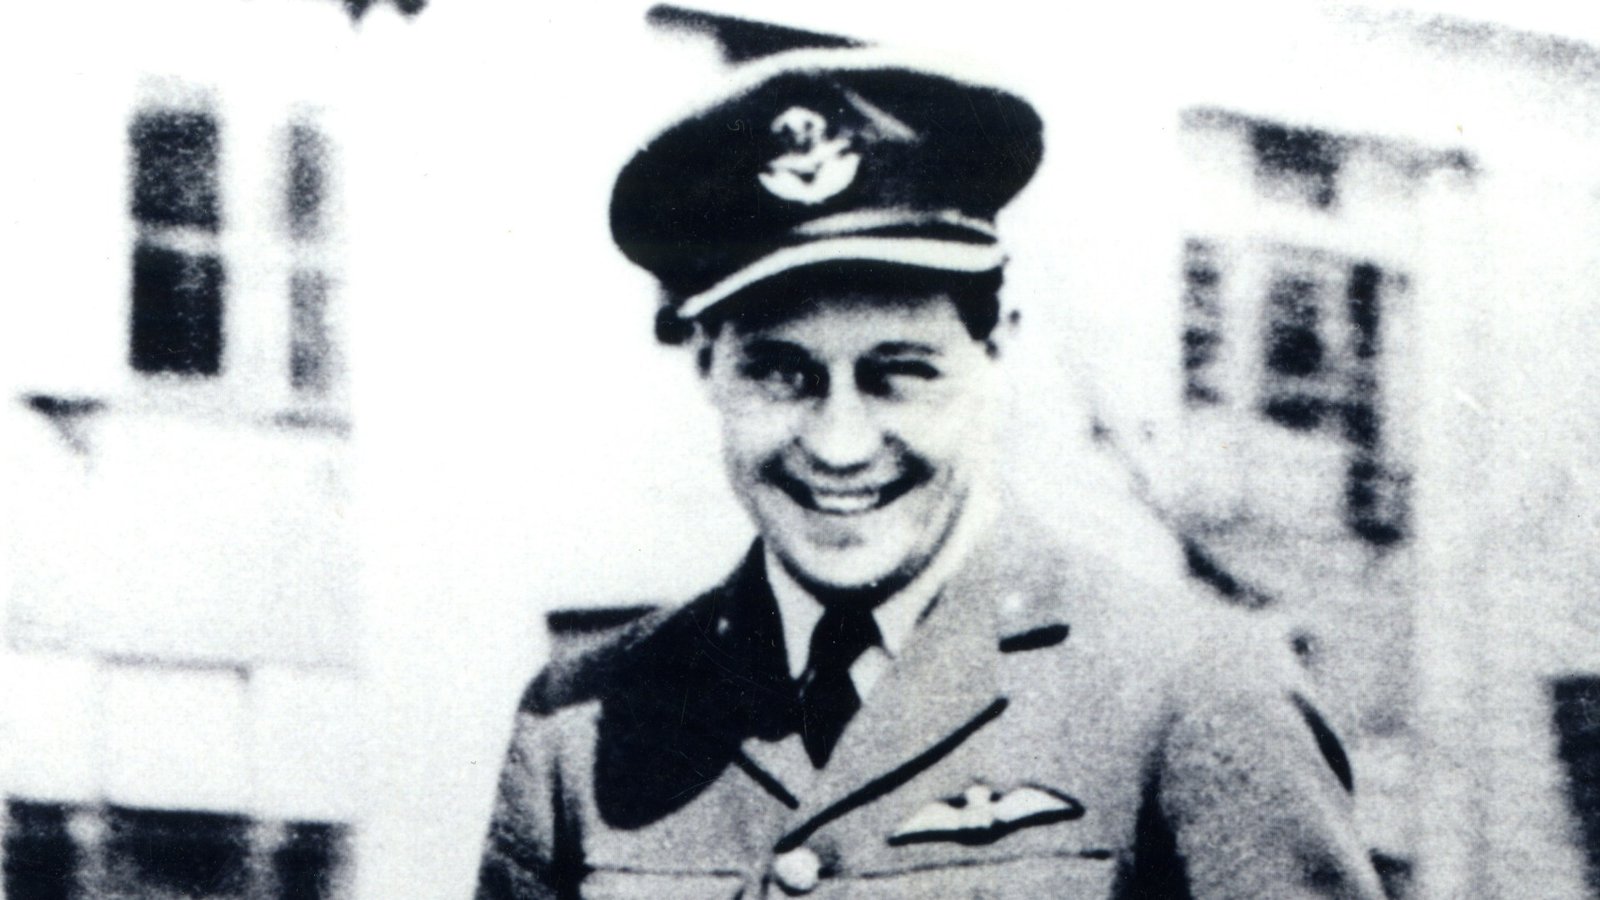 Inside life of real Great Escape mastermind… Spitfire ace, spy & womaniser who helped 200 tunnel to freedom from Nazis